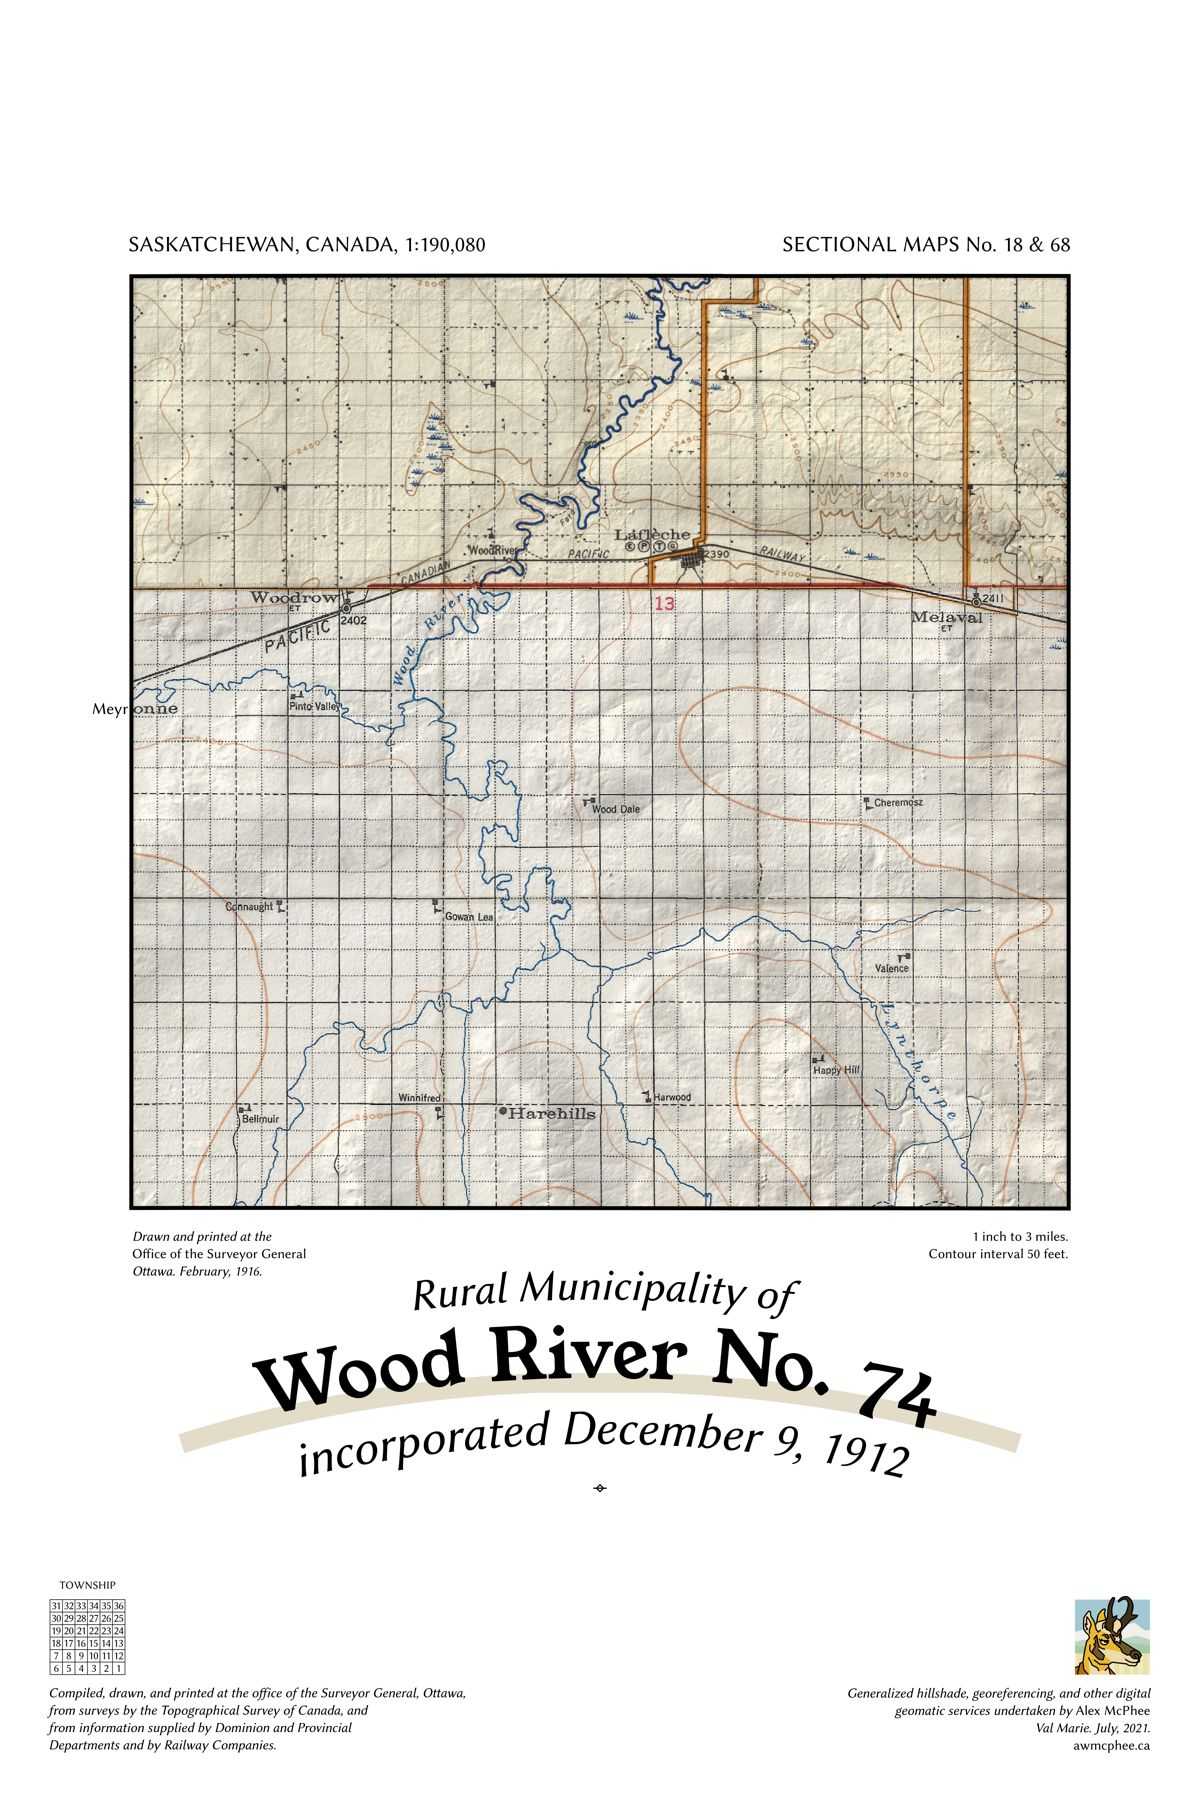 A map of the Rural Municipality of Wood River No. 74.